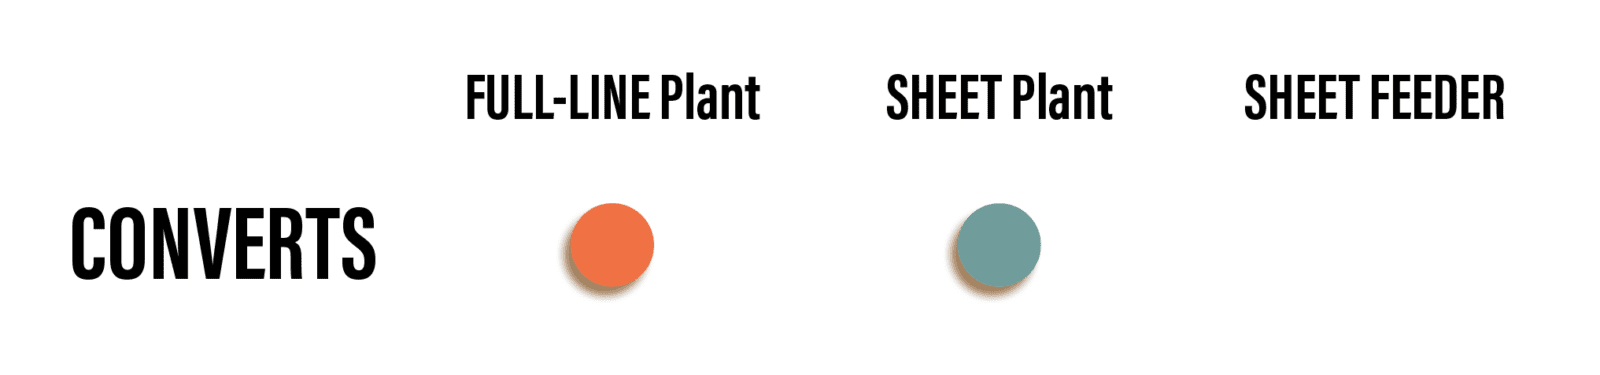 Full-line or combining plants and sheet plants have converting equipment in house. Sheet plants do not.